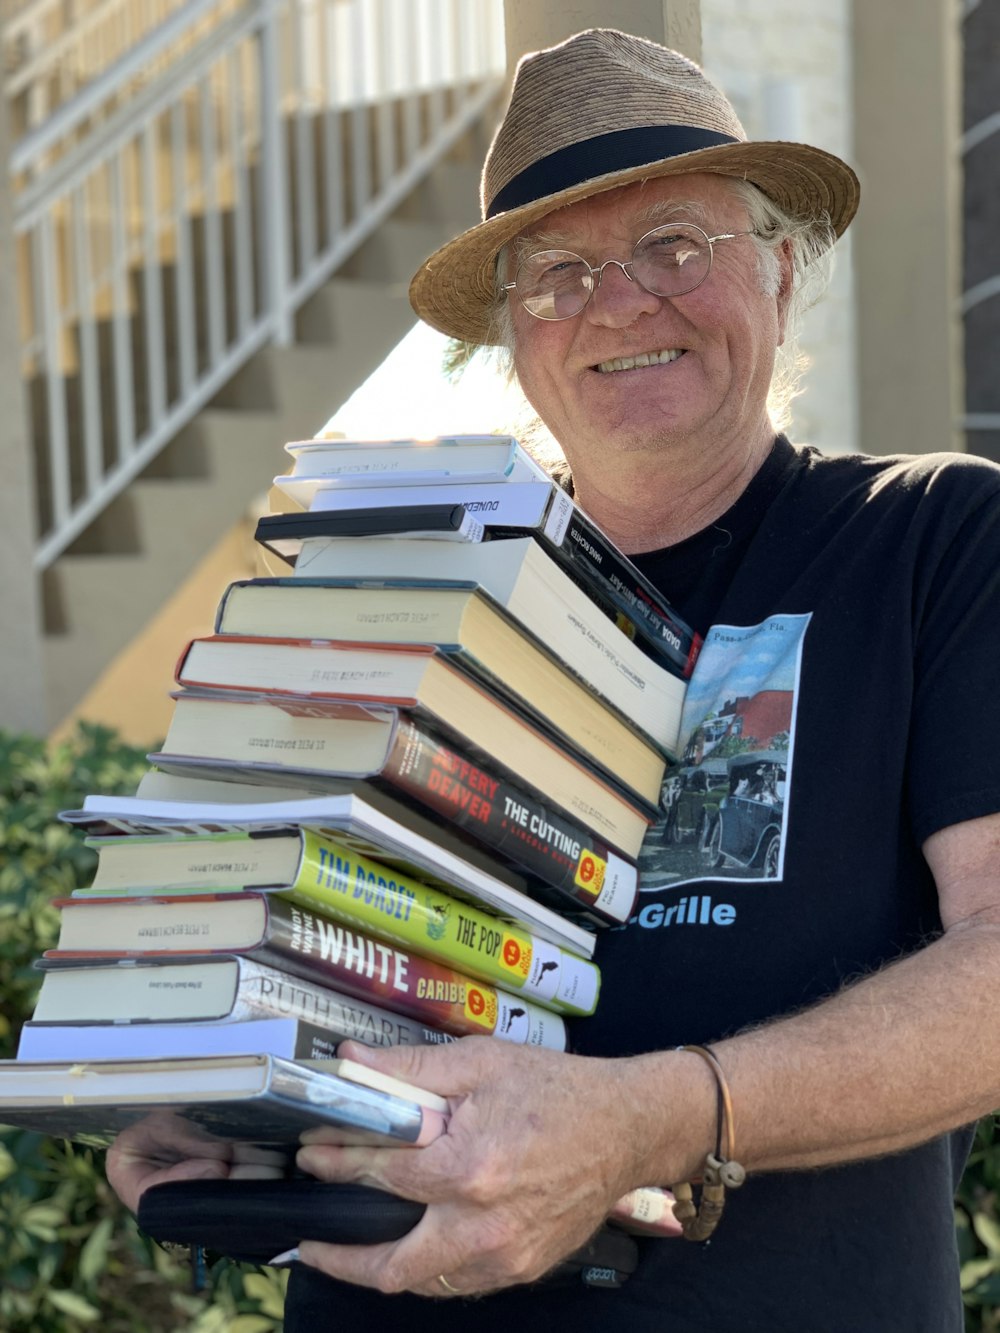 man holding pile of books while smiling